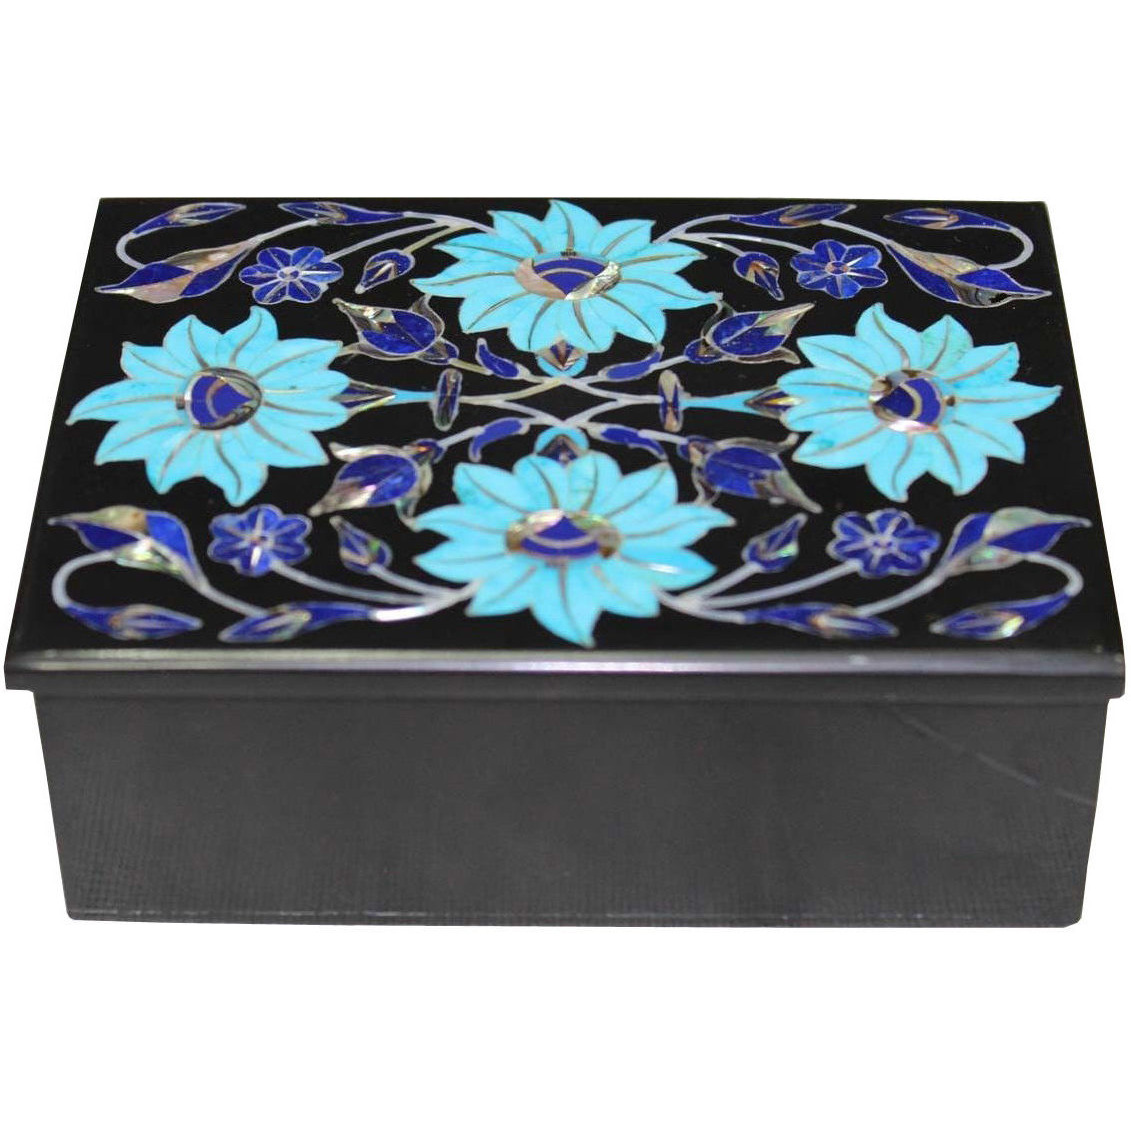 7   x 5   Black Marble Jewelry Box Turquoise Floral Marquetry Inlaid Art Gift